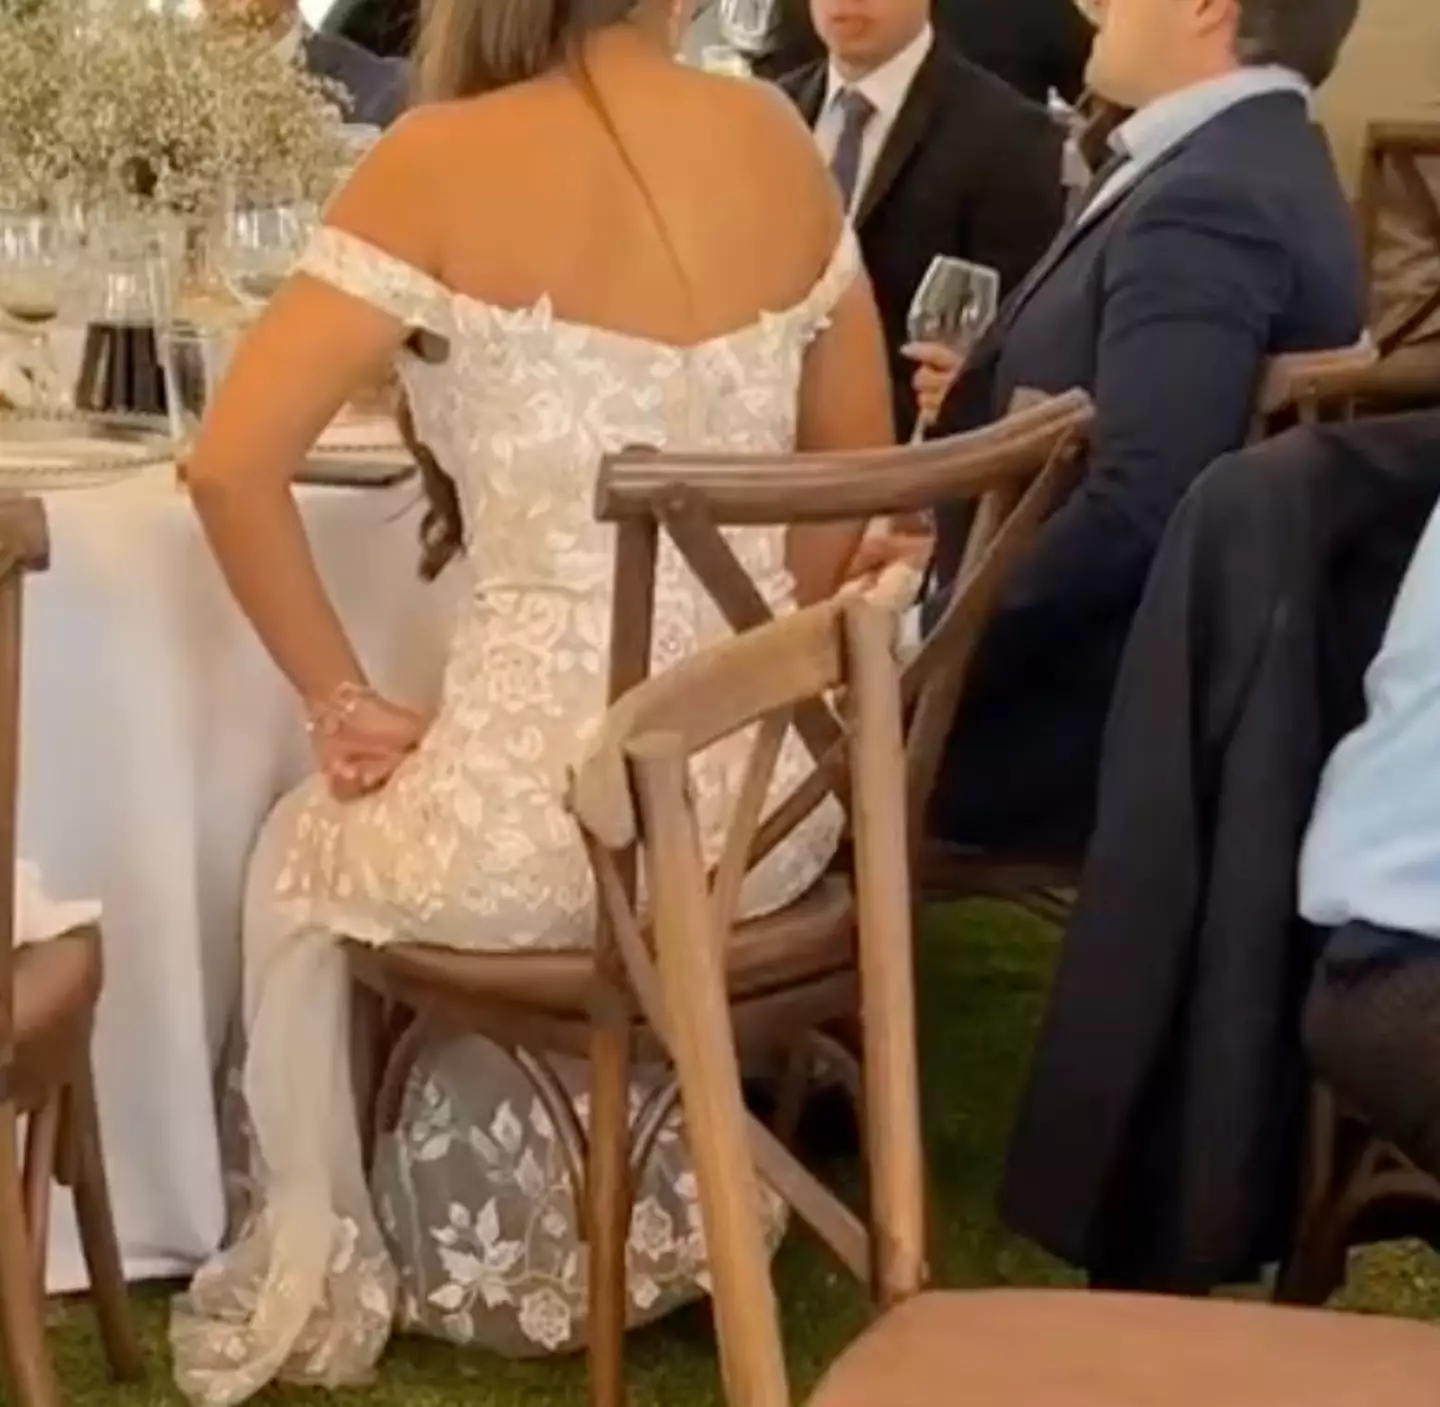 One of the dresses was said to be a 'legit wedding dress'.